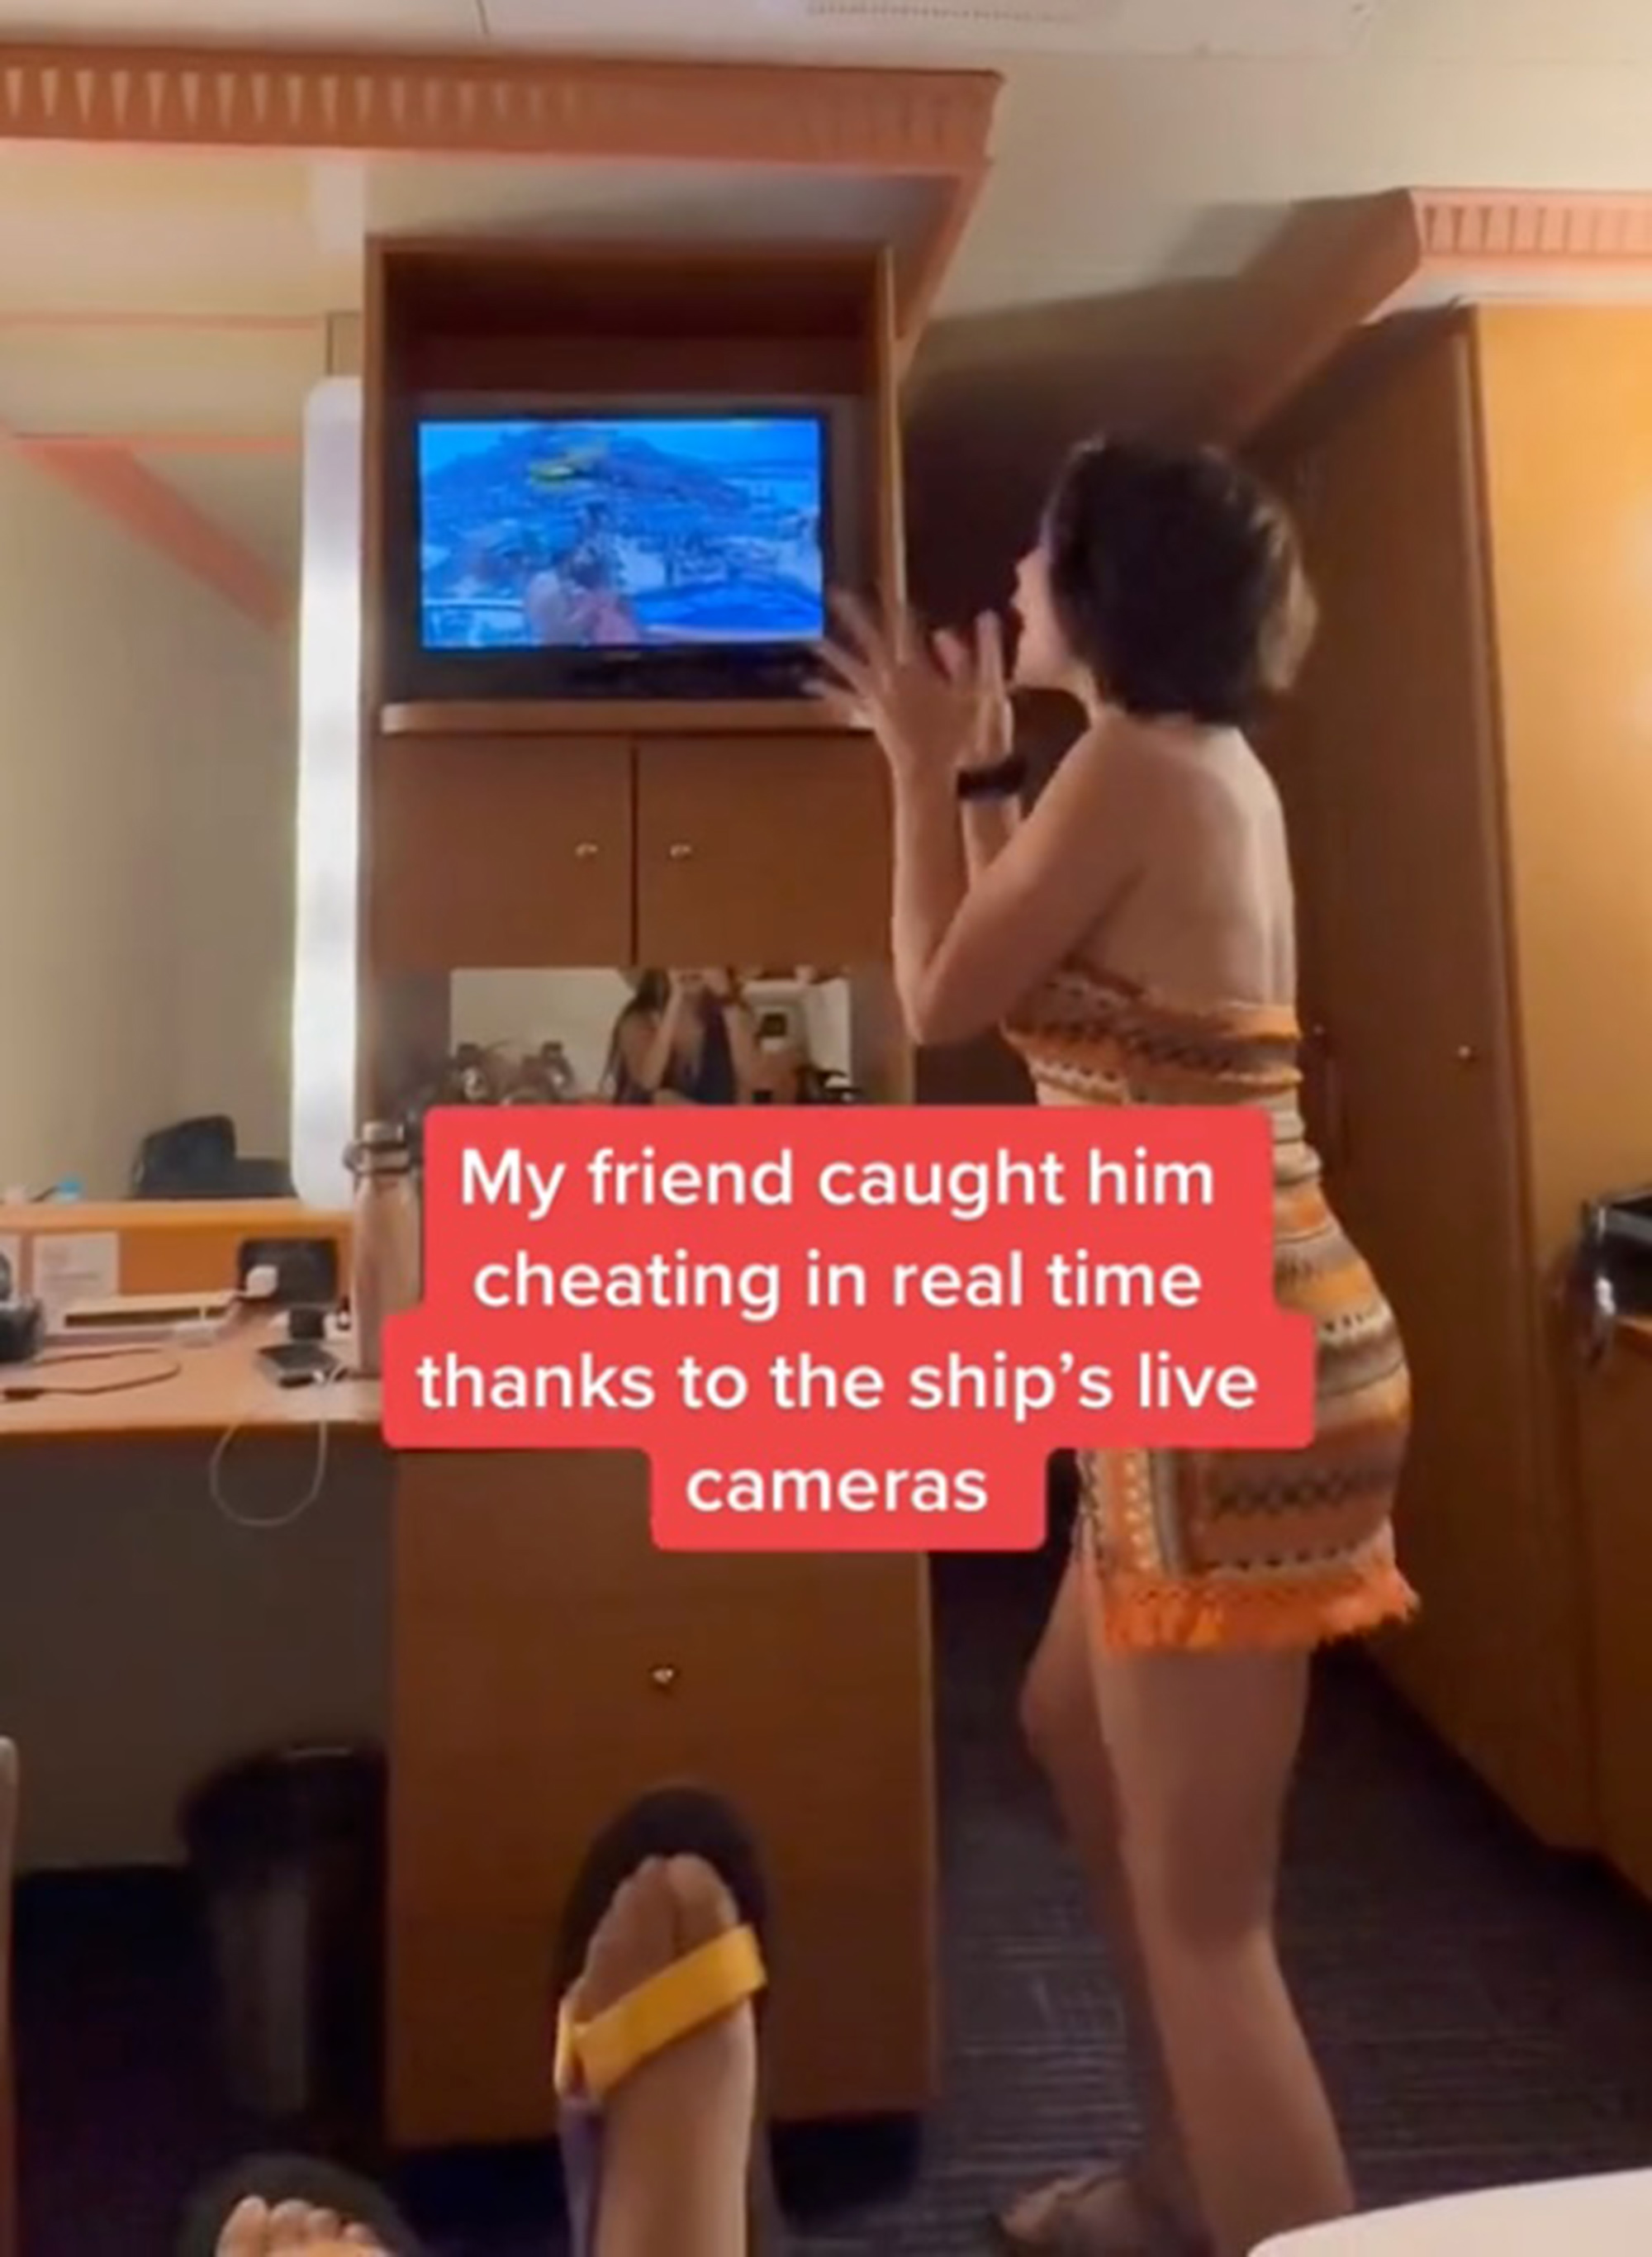 ashley marie osborne recommends hidden camera caught cheating pic